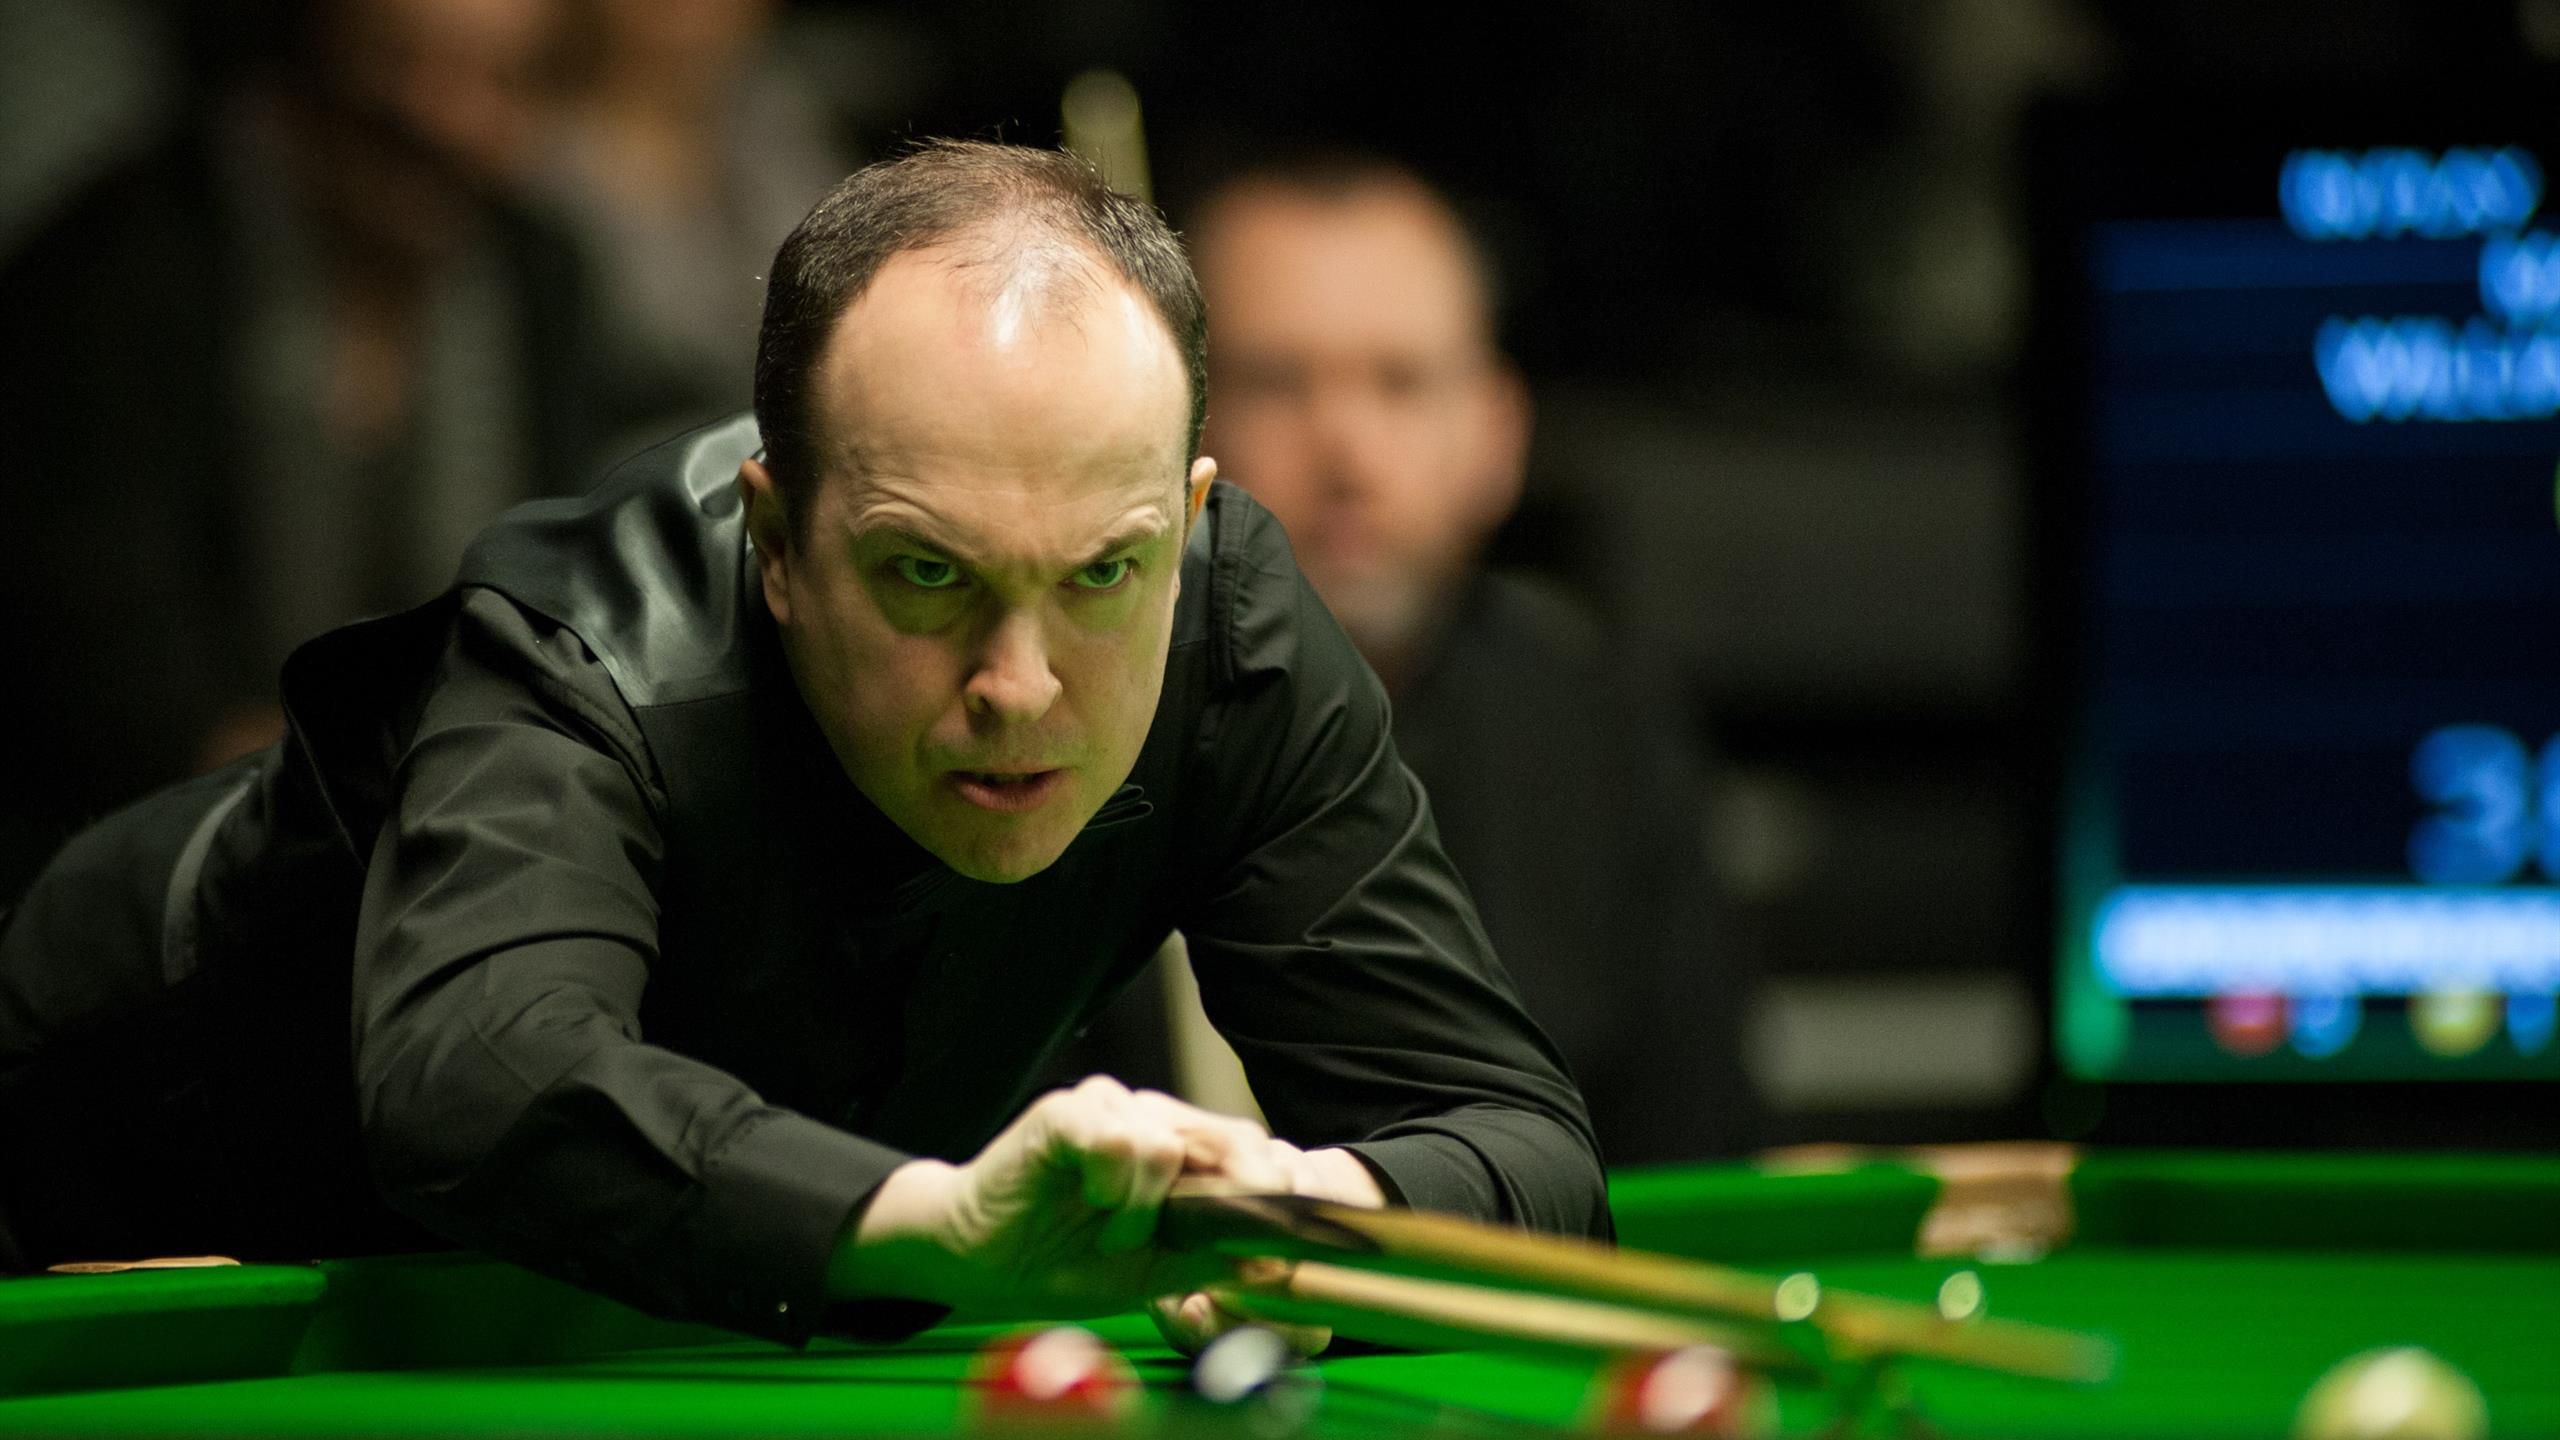 World Snooker Championship: Fergal O'Brien brings curtain down on 33-year career after defeat in Crucible qualifier